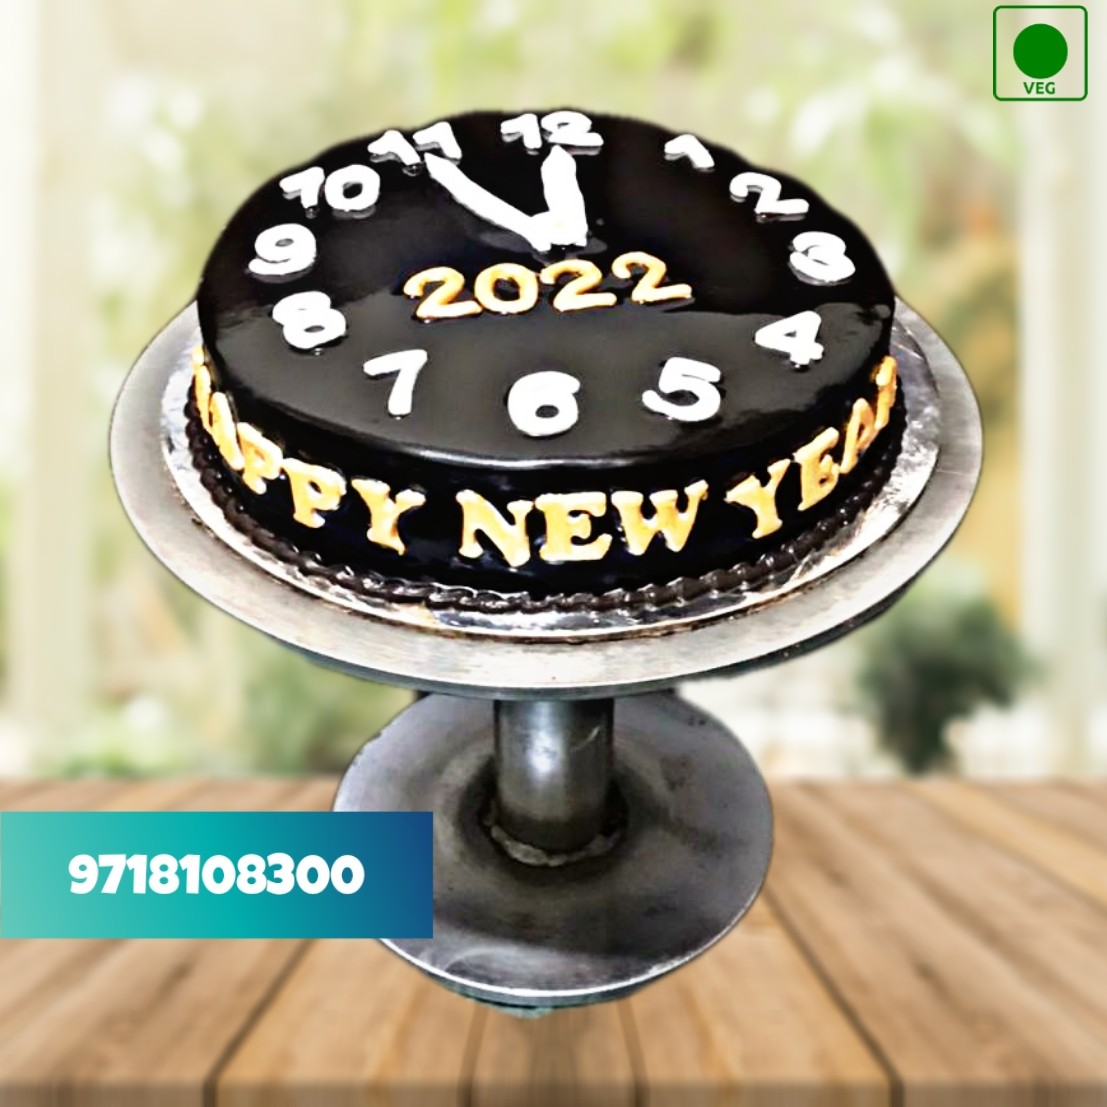 Easy Simple New Year Cake Design 2023/New Year Cake Decoration Ideas  2023for Beginners/Cake photos - YouTube